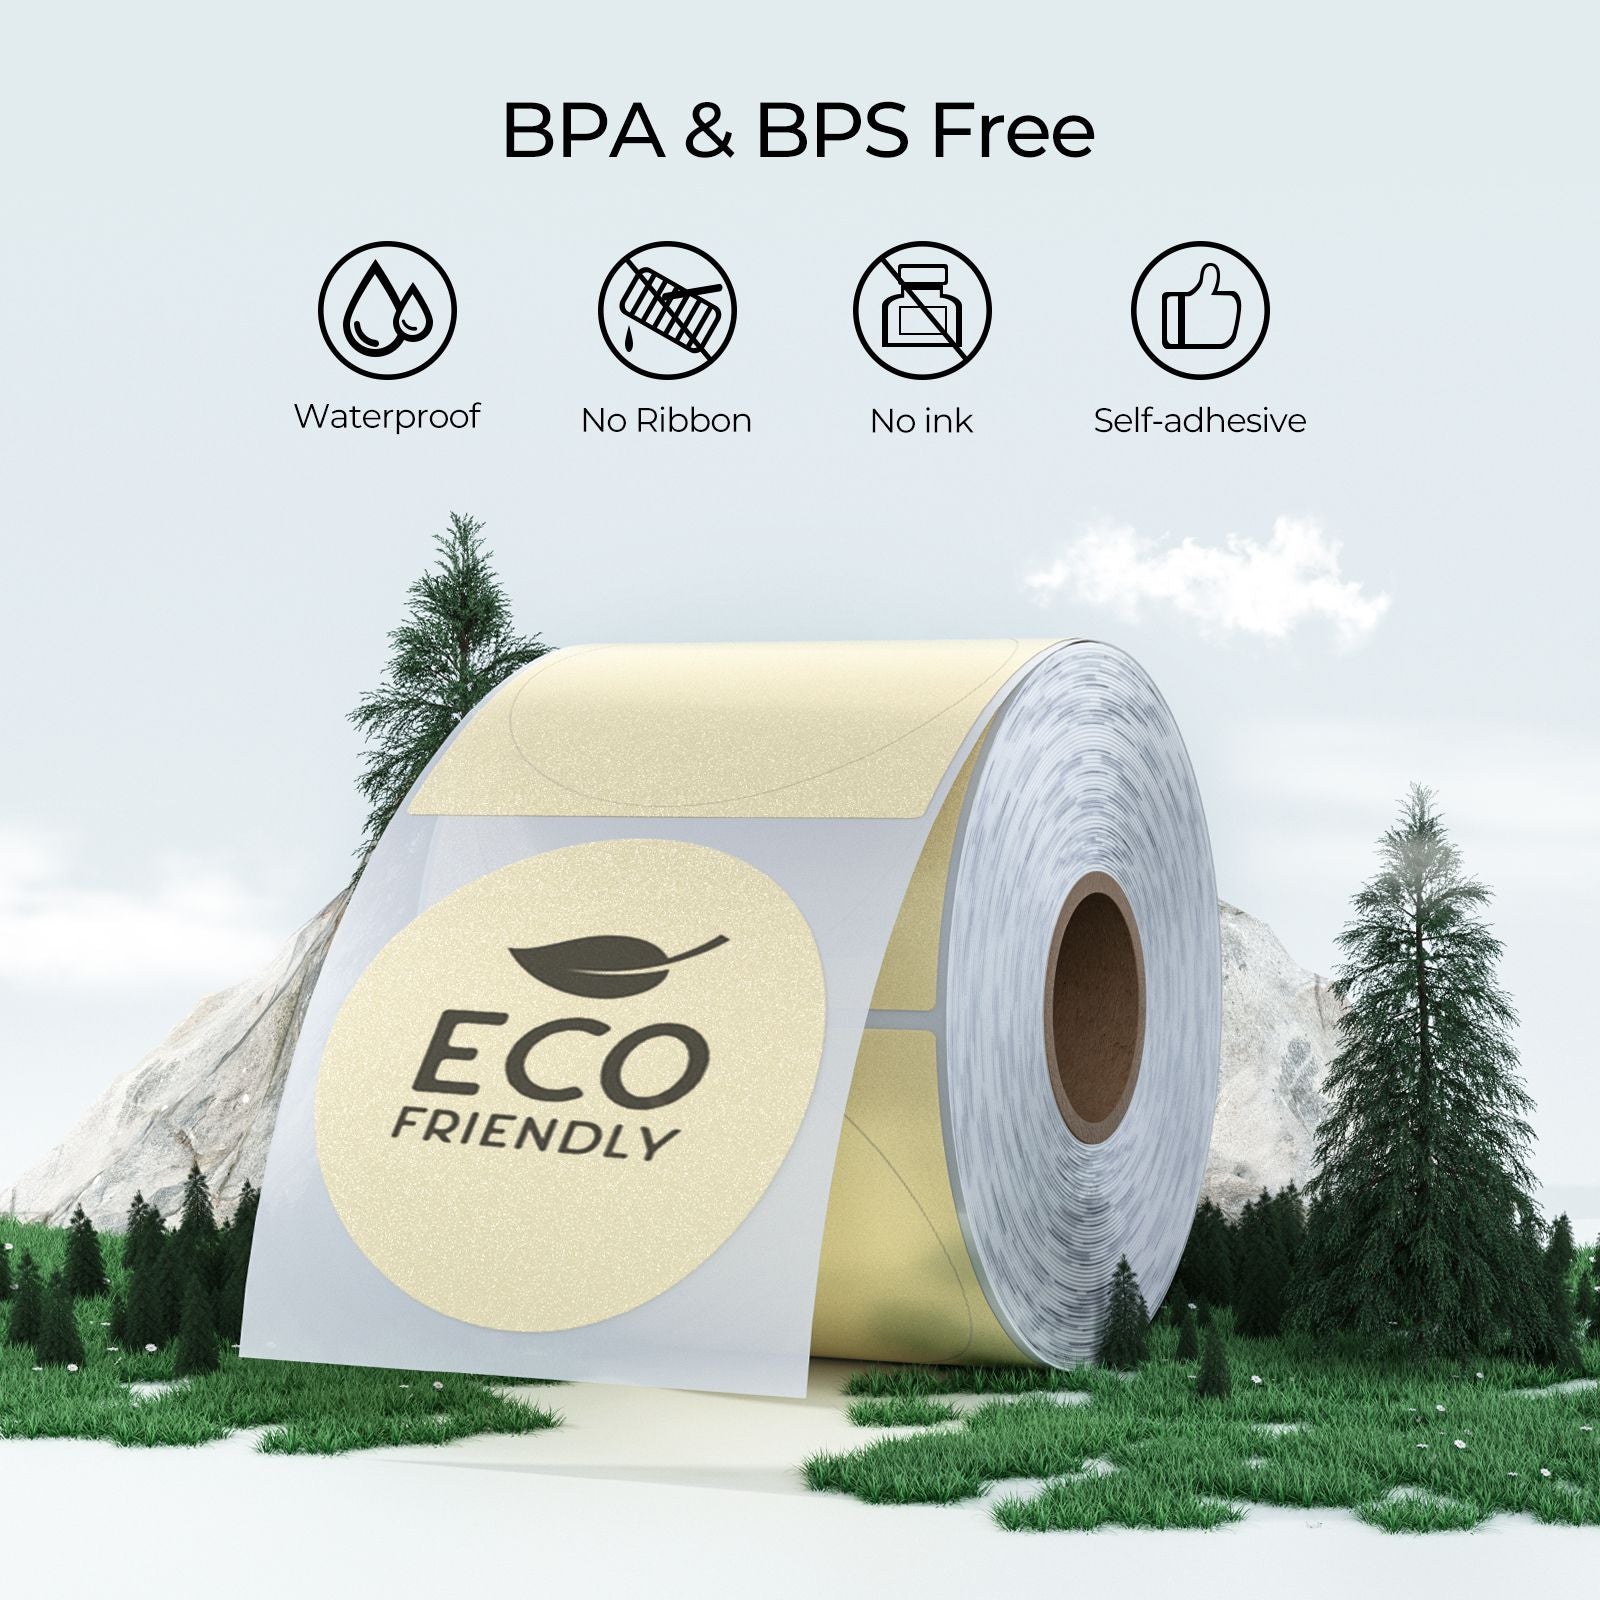 50mm gold circle labels are BPA&BPS-Free.